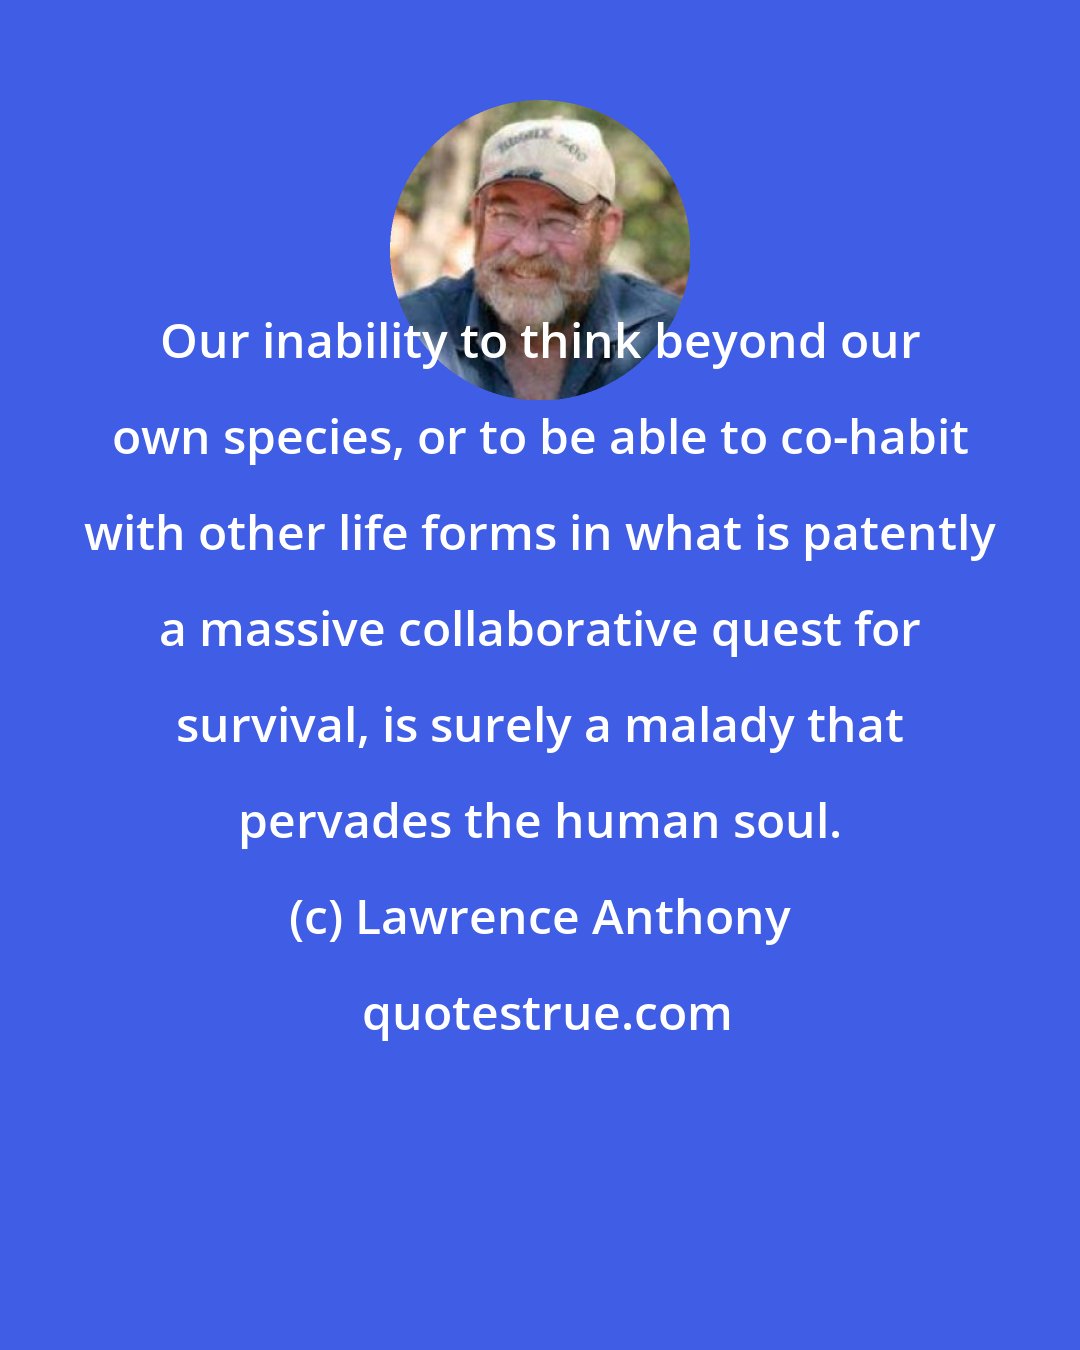 Lawrence Anthony: Our inability to think beyond our own species, or to be able to co-habit with other life forms in what is patently a massive collaborative quest for survival, is surely a malady that pervades the human soul.